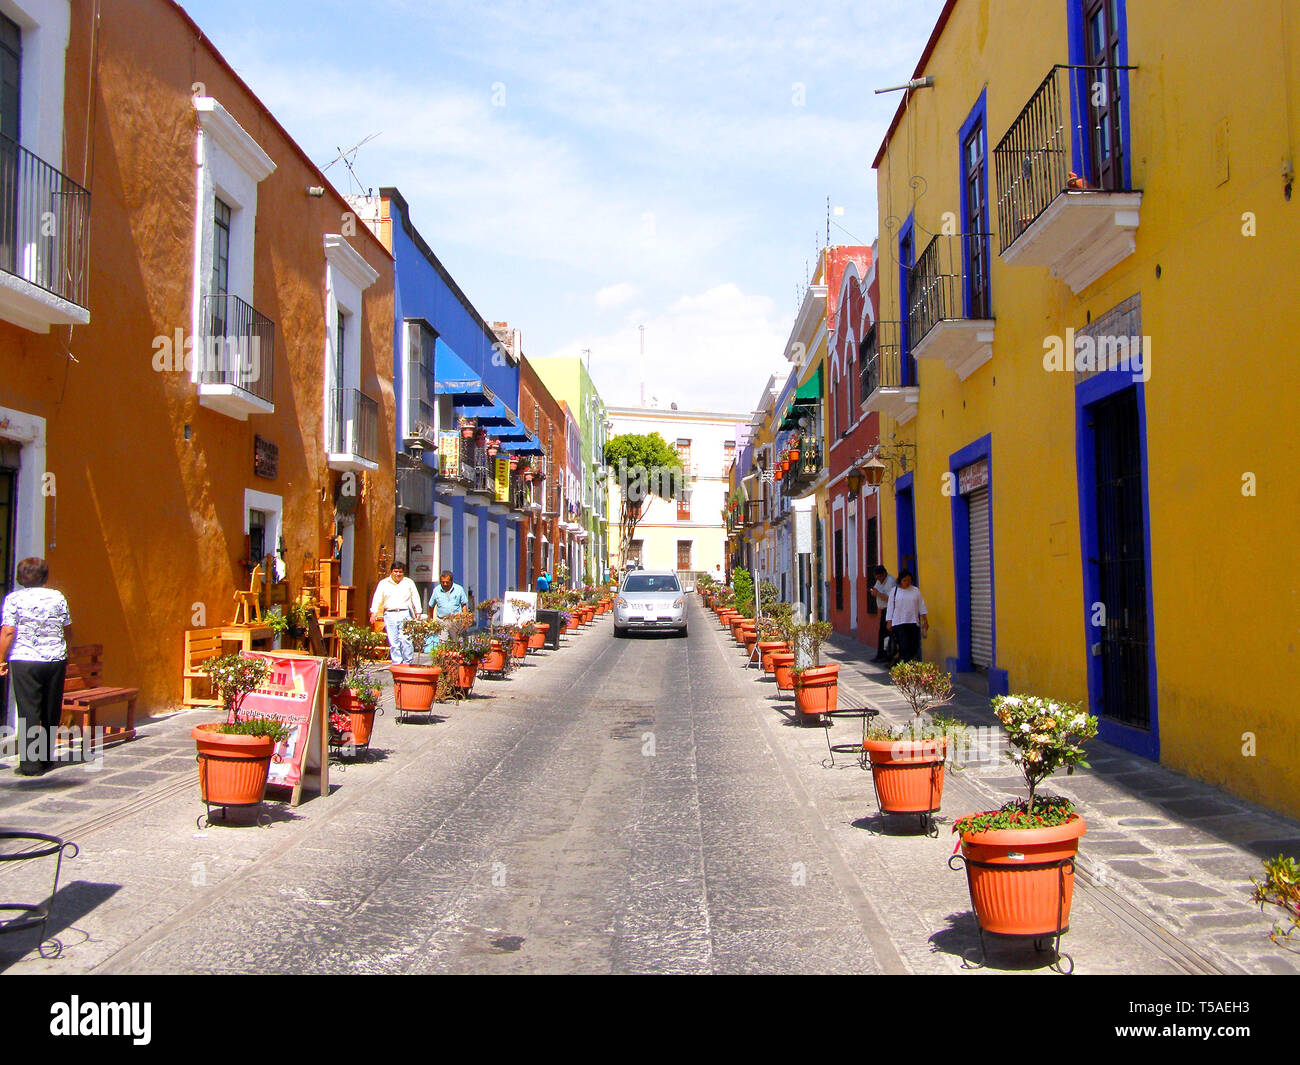 MERIDA, MEXICO 11 th March 2016: Street scene with colorful traditional old houses and old cars on street in Merida on hot sunny day. Big colonial cit Stock Photo